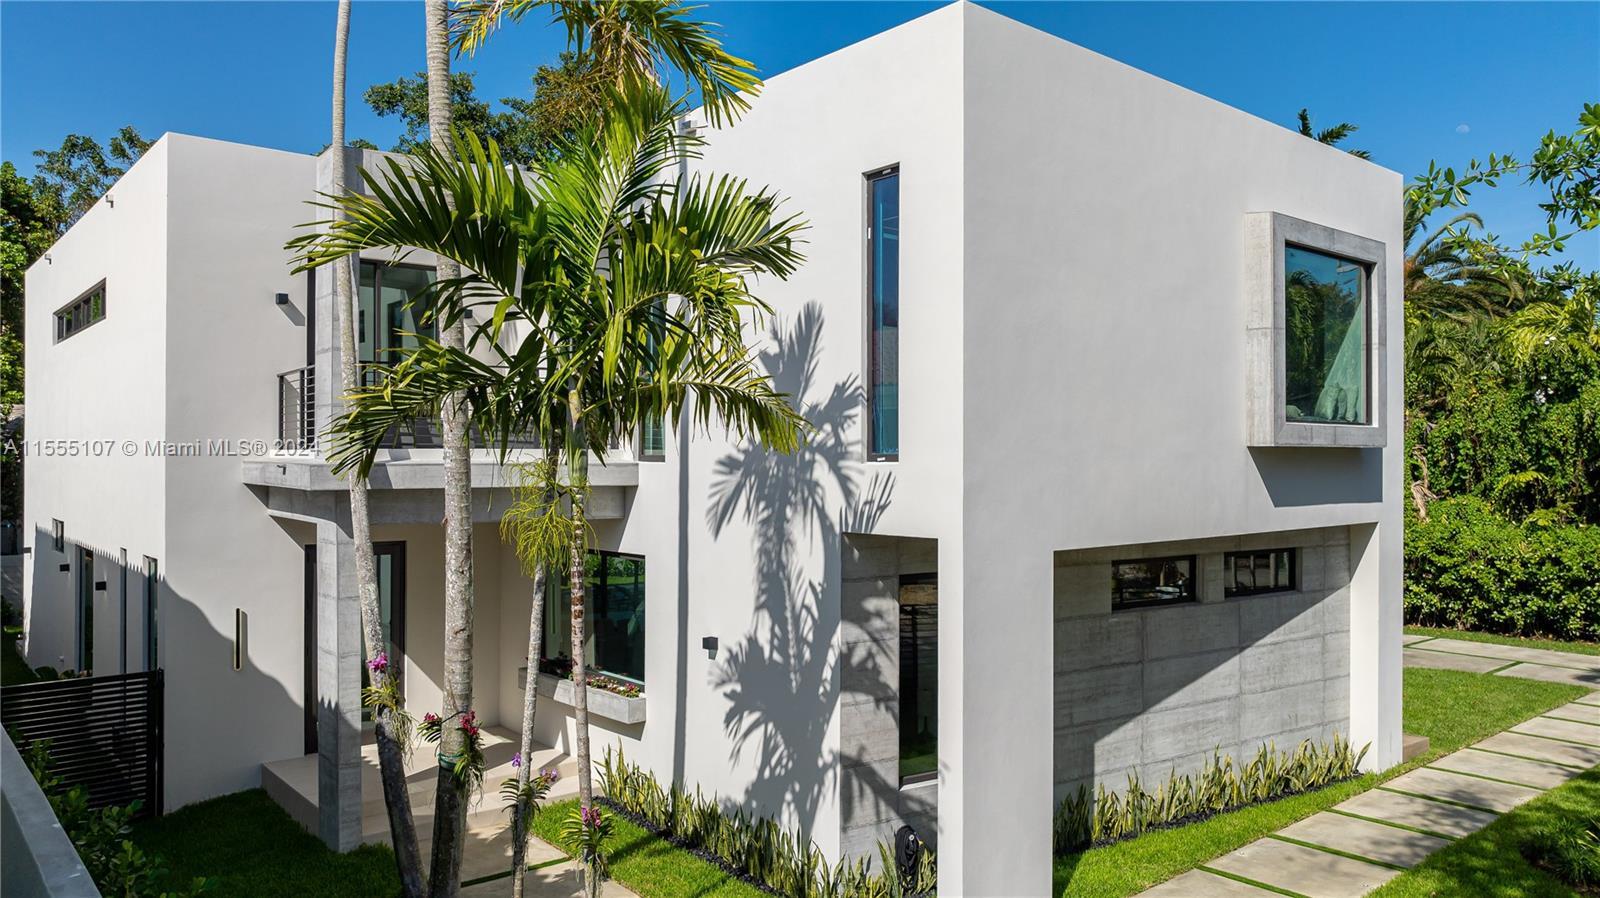 Located in South Coconut Grove’s Park Avenue, this spectacular modern new residence features 5 bedro